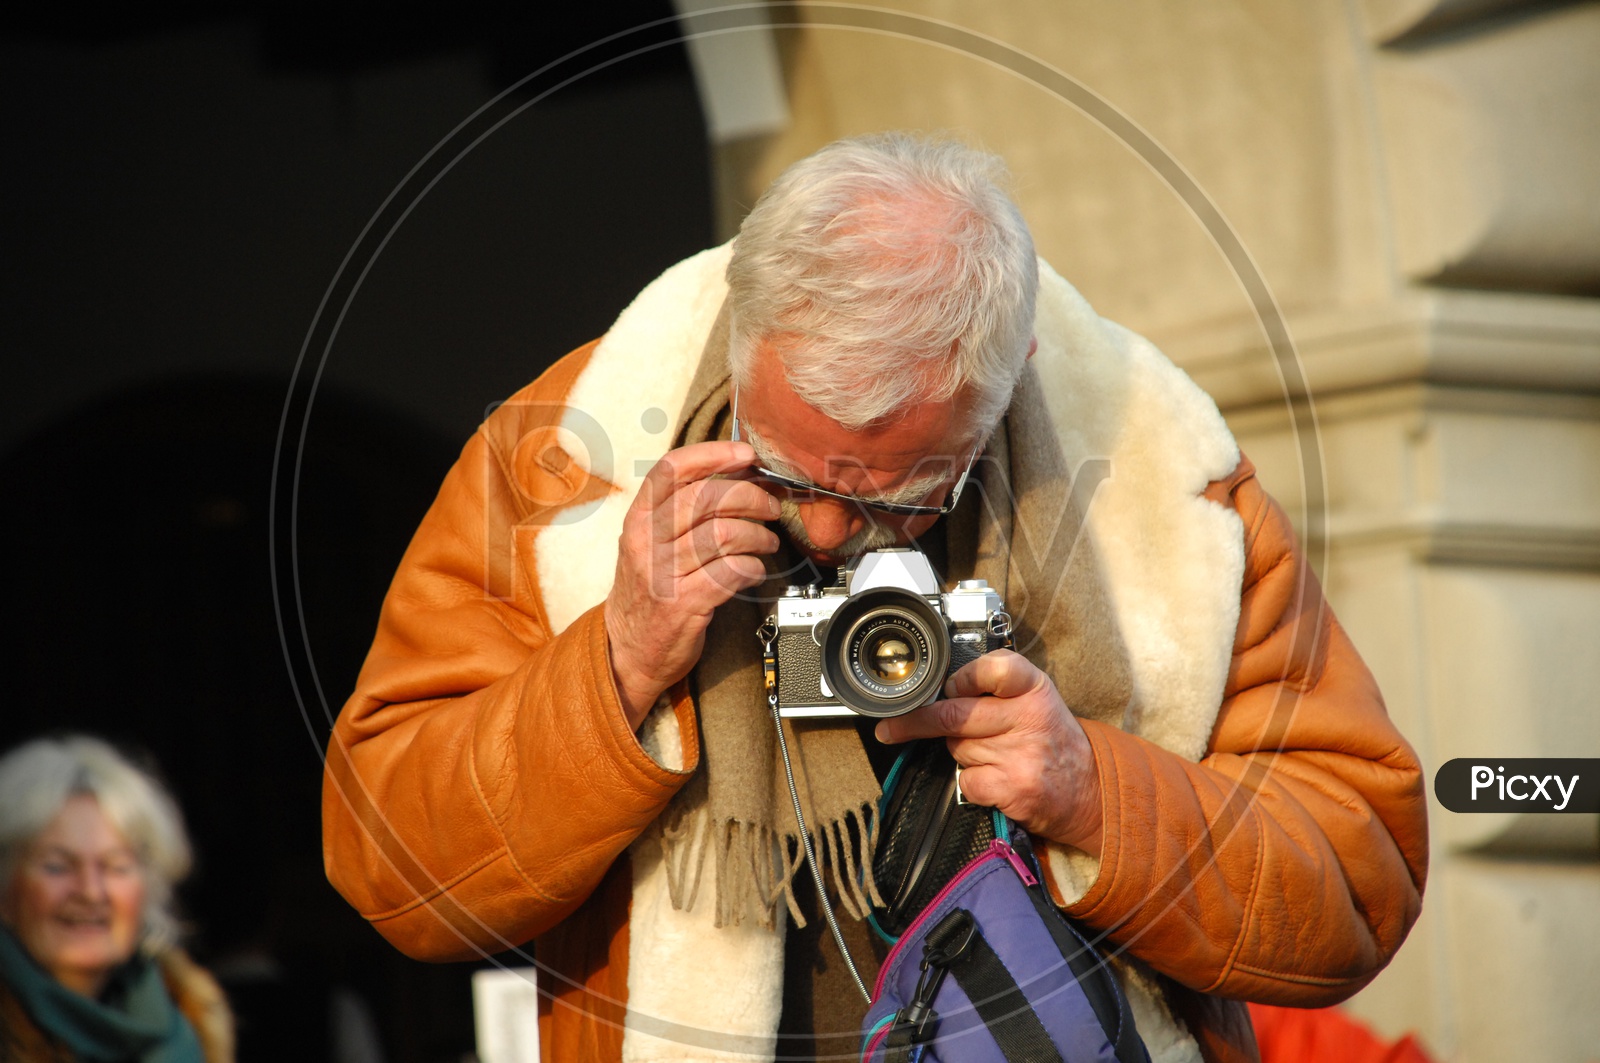 A man taking picture with vintage camera